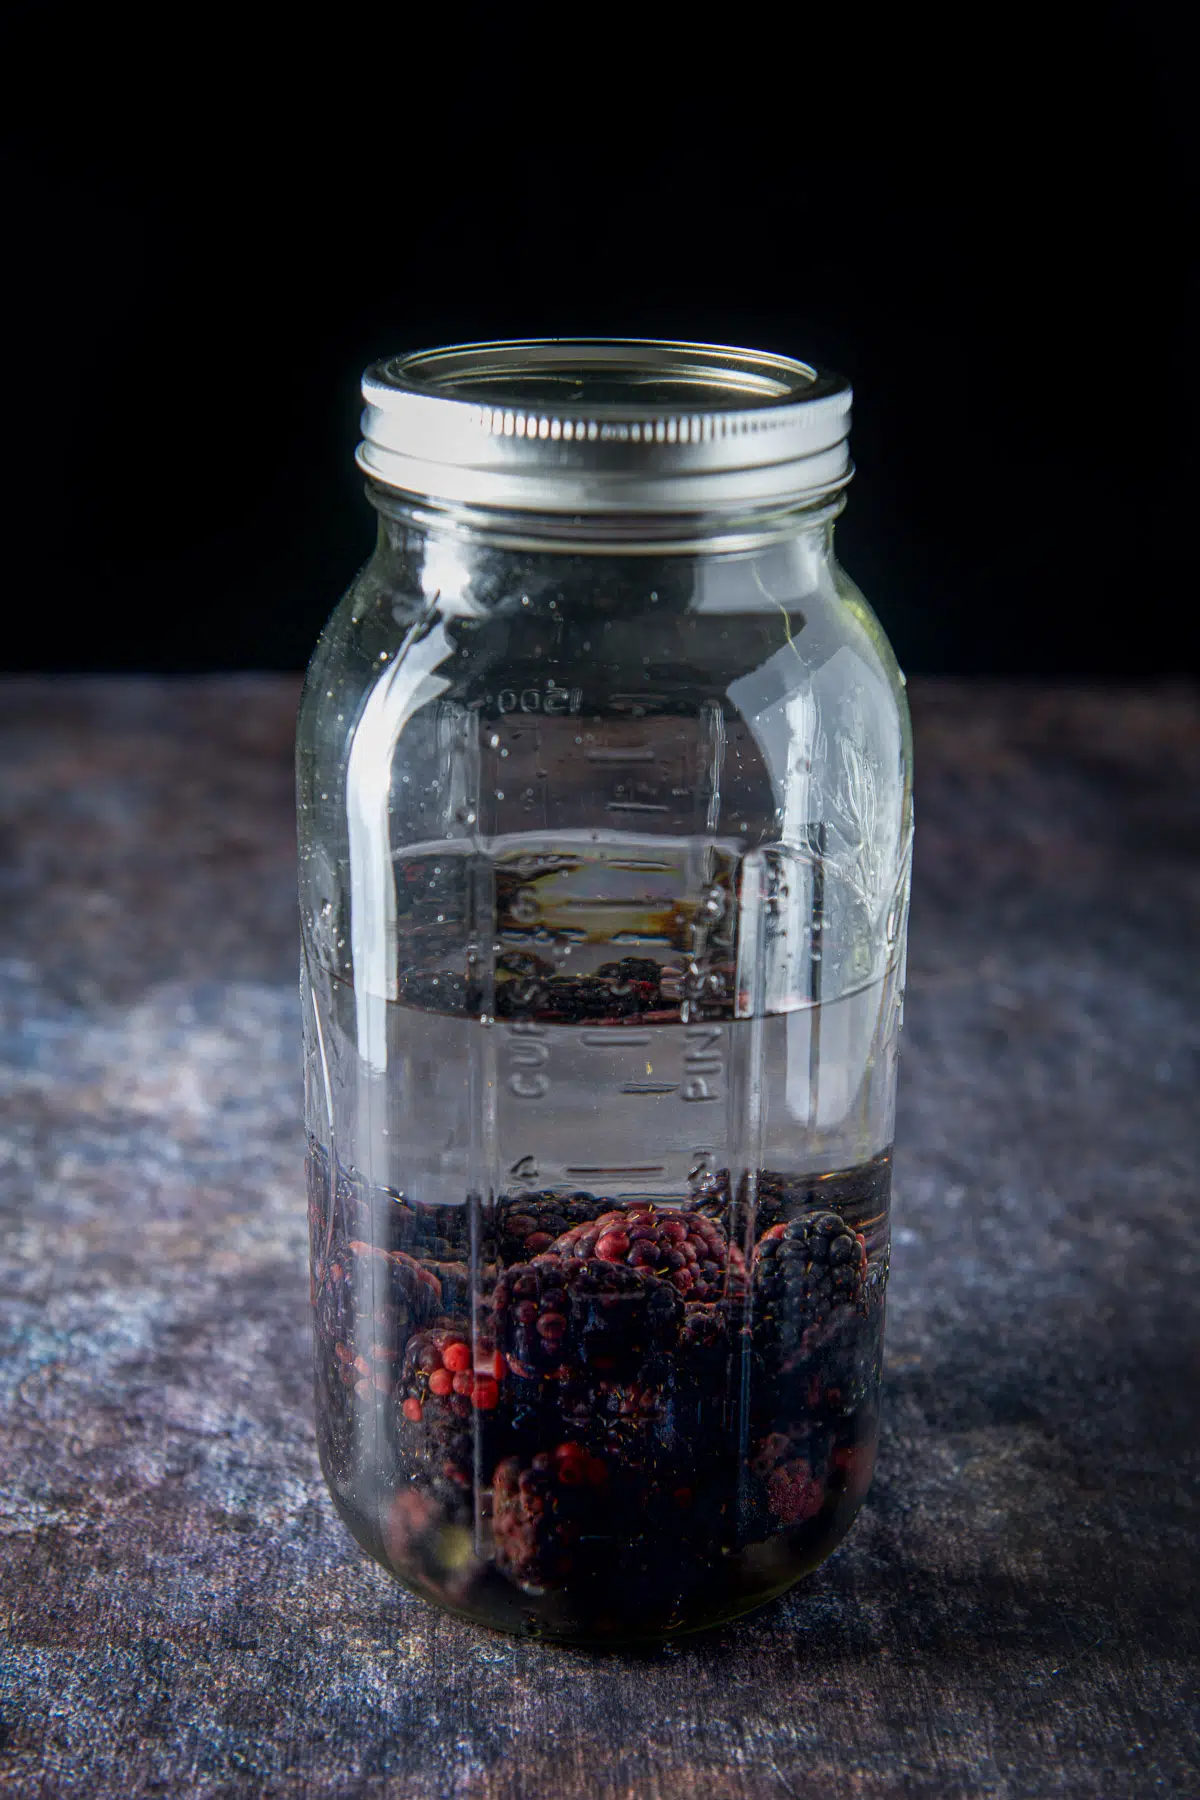 A capped jar with blackberries and vodka ready to be infused